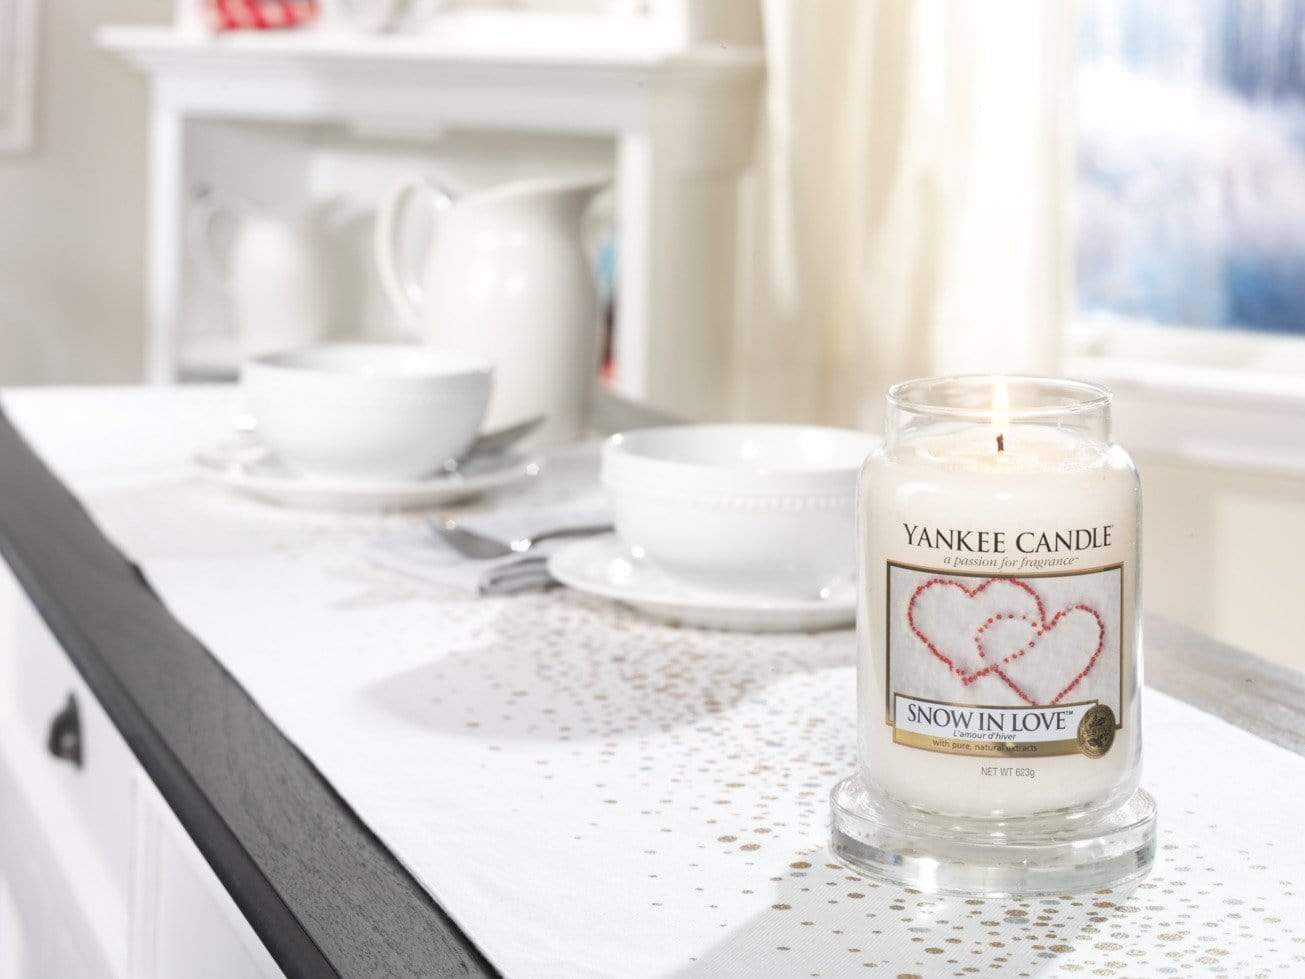 Yankee Candle Large Jar Candle Yankee Candle Large Jar - Snow in Love